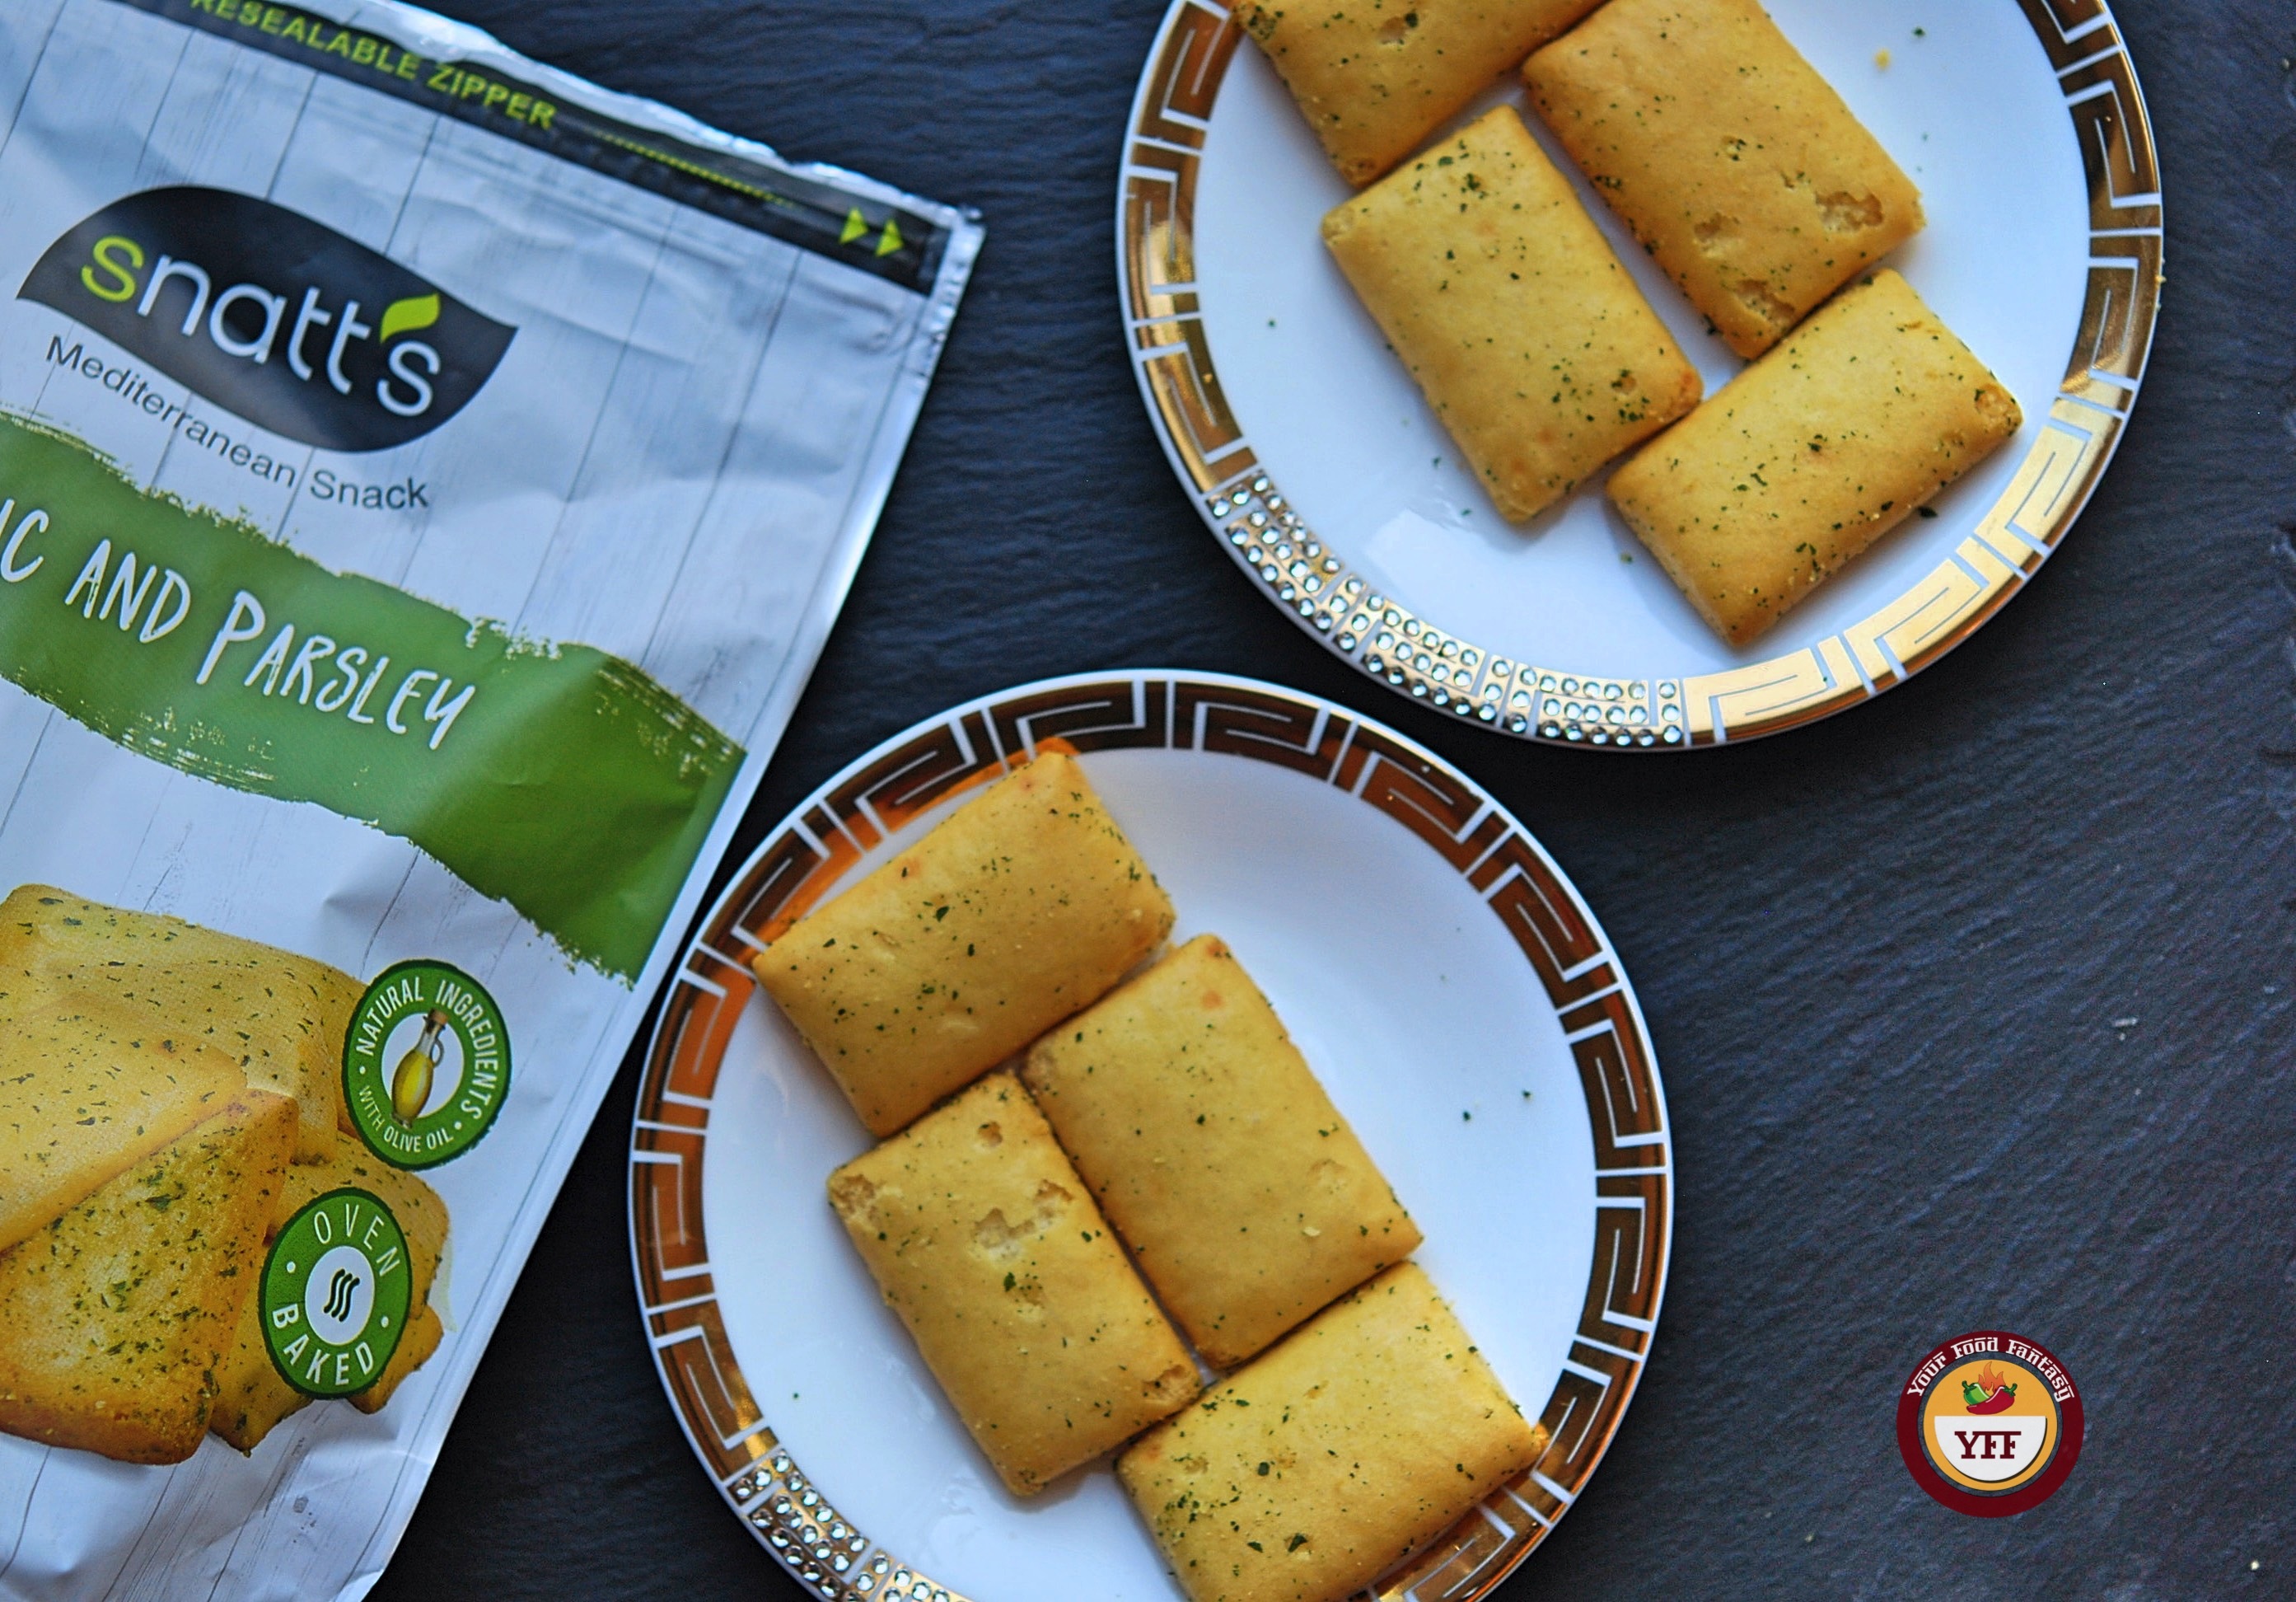 Snatts Garlic & Parsley Snacks | Review by Your Food Fantasy